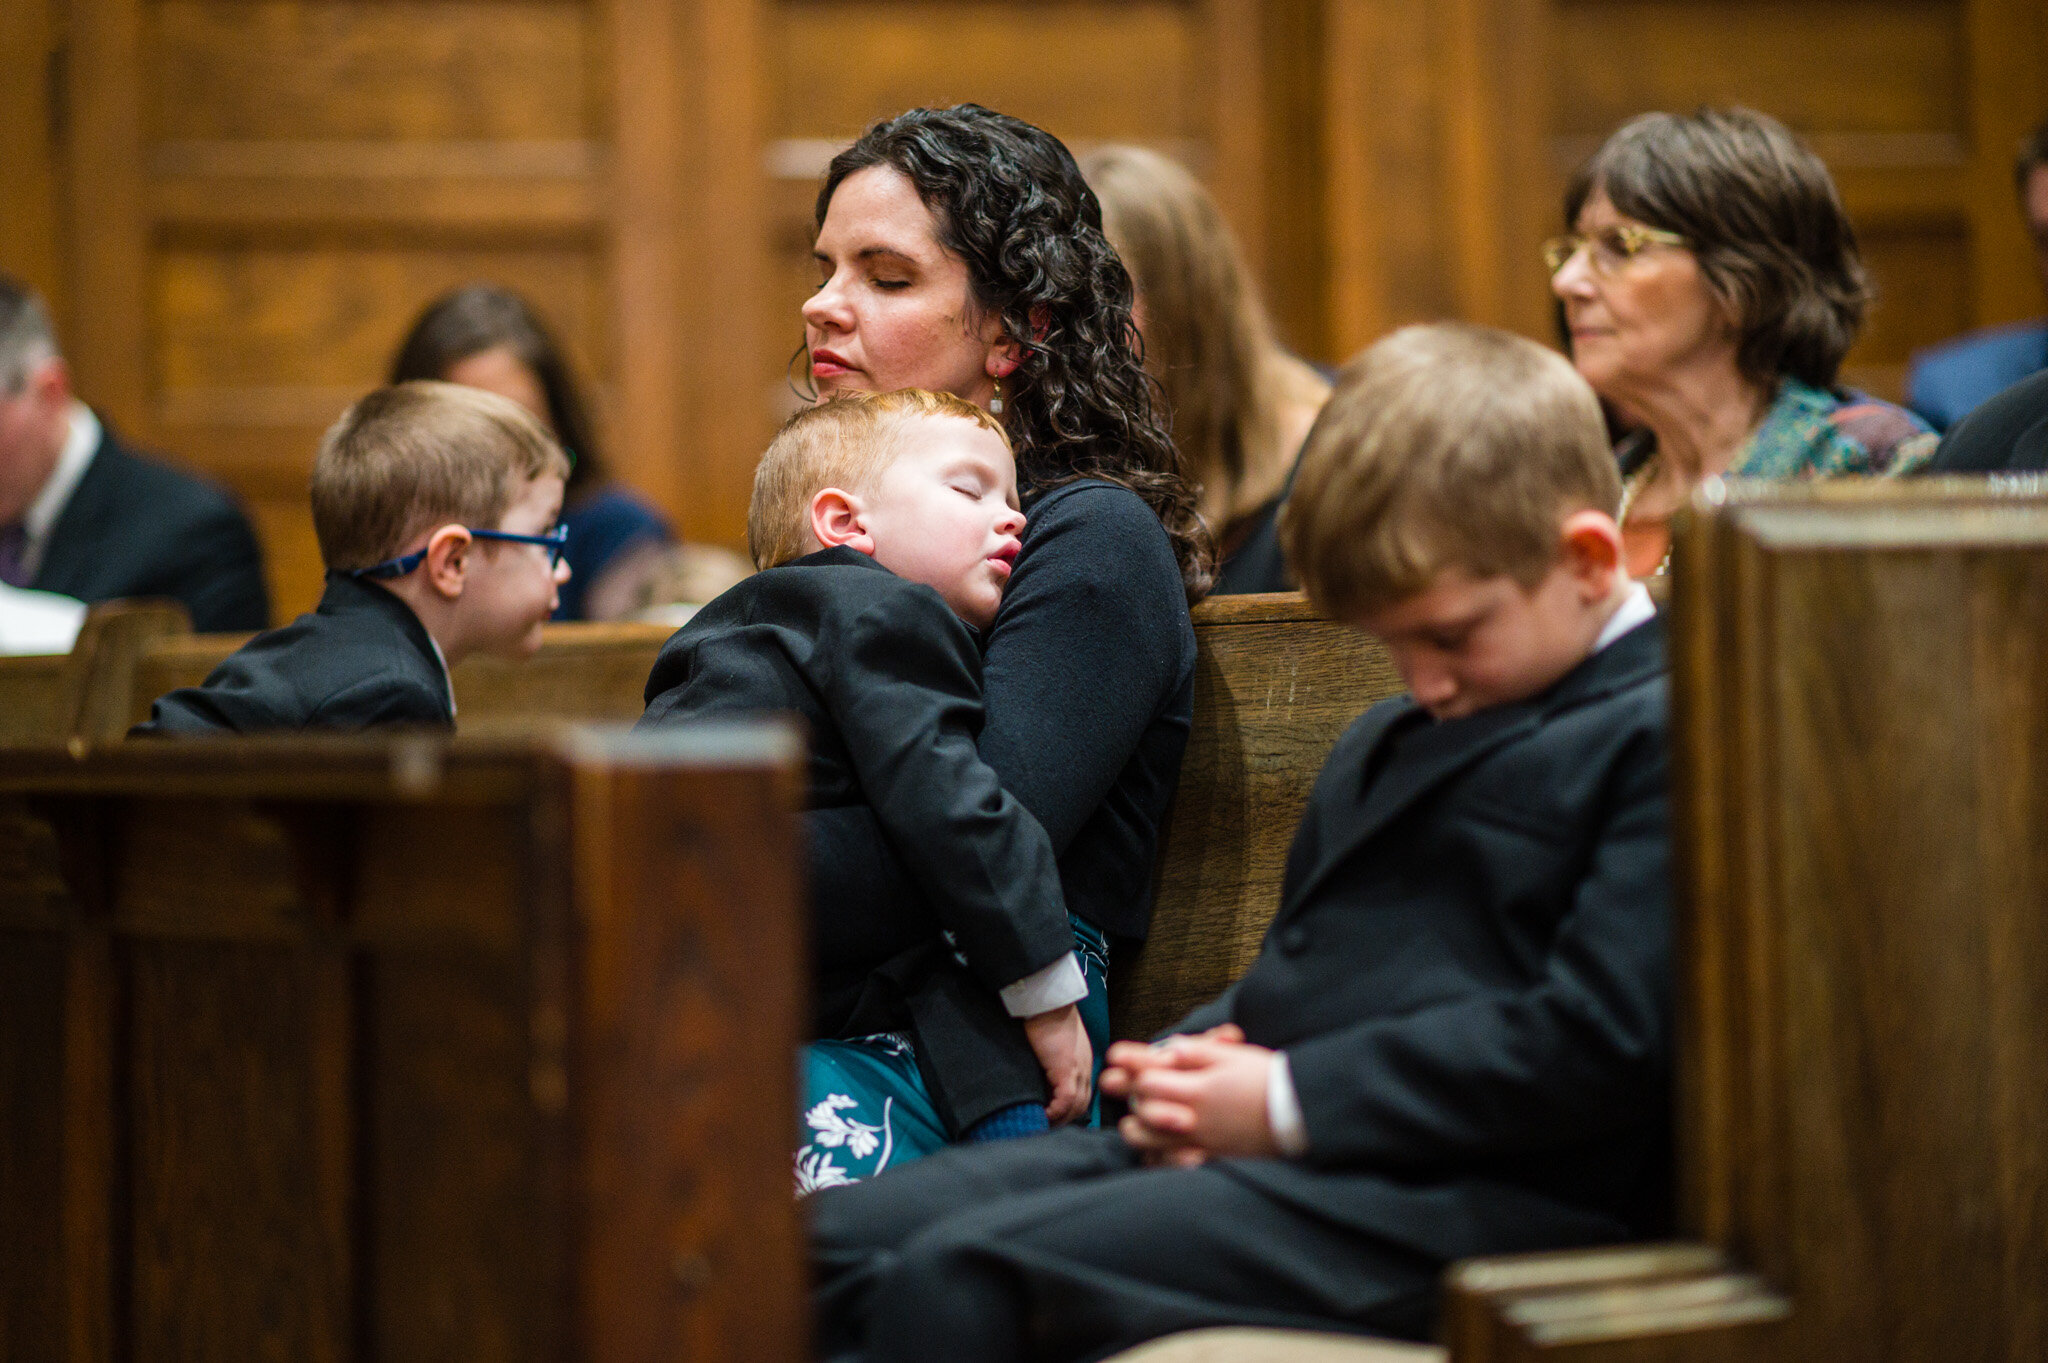 A sleeping child at a wedding ceremony